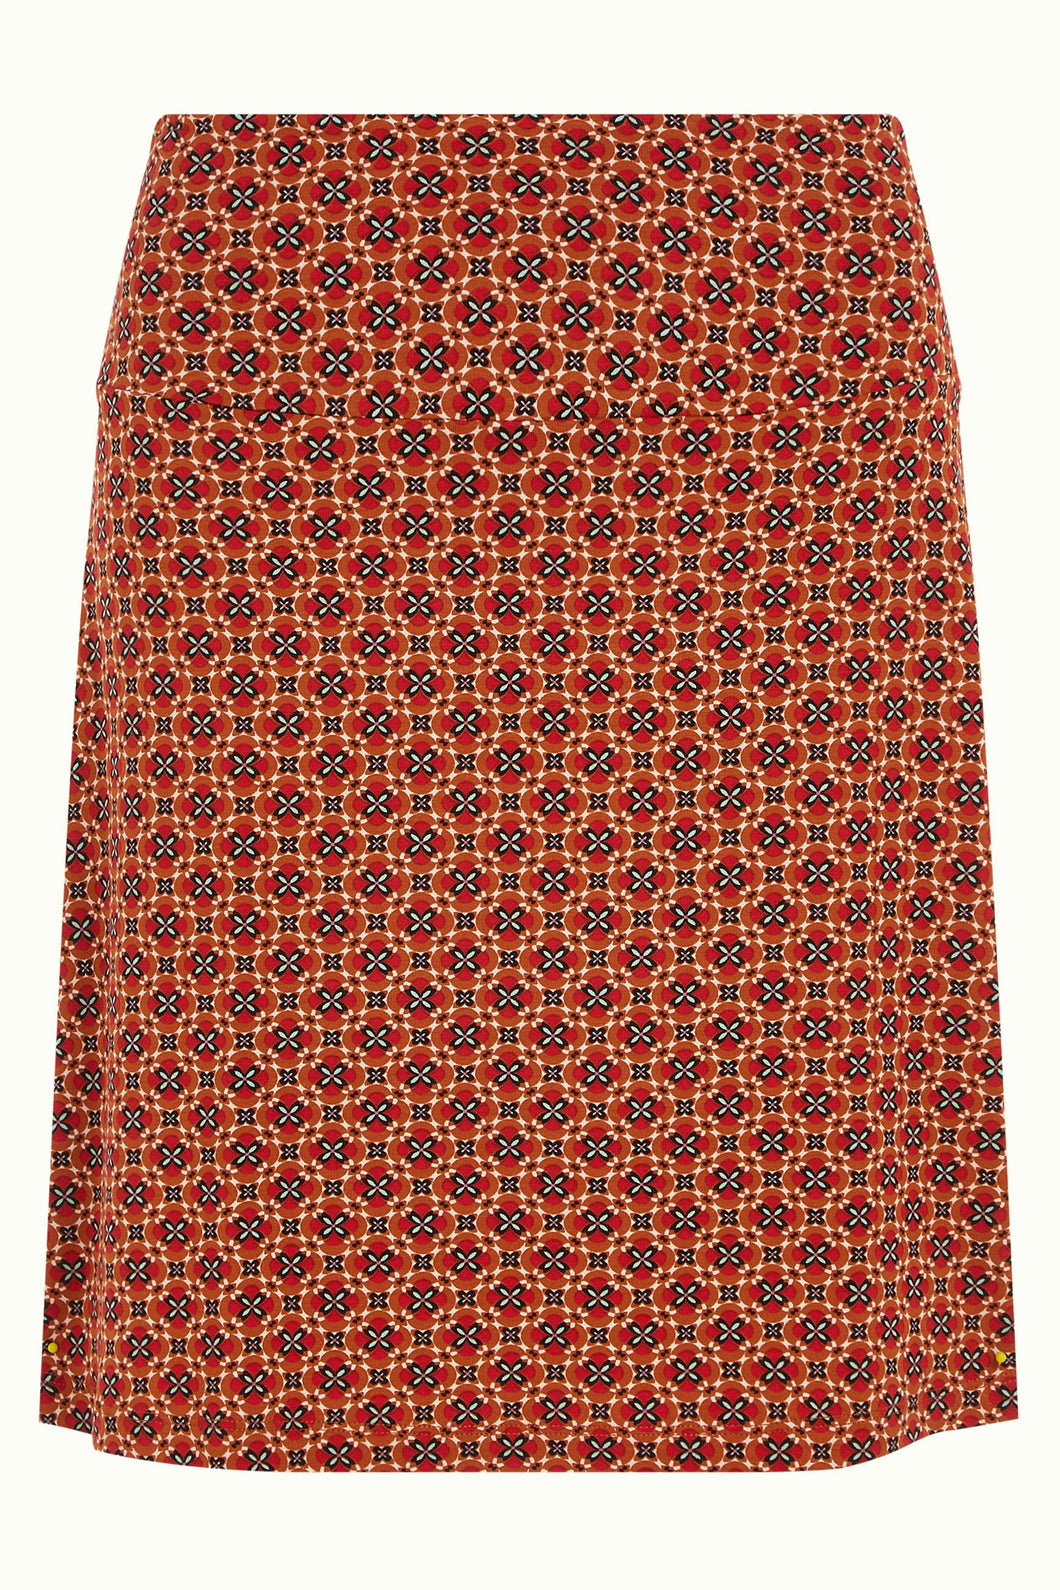 Rock King Louie, Style: Border Skirt Miro, Farbe: Jalapeno Red, *New in*